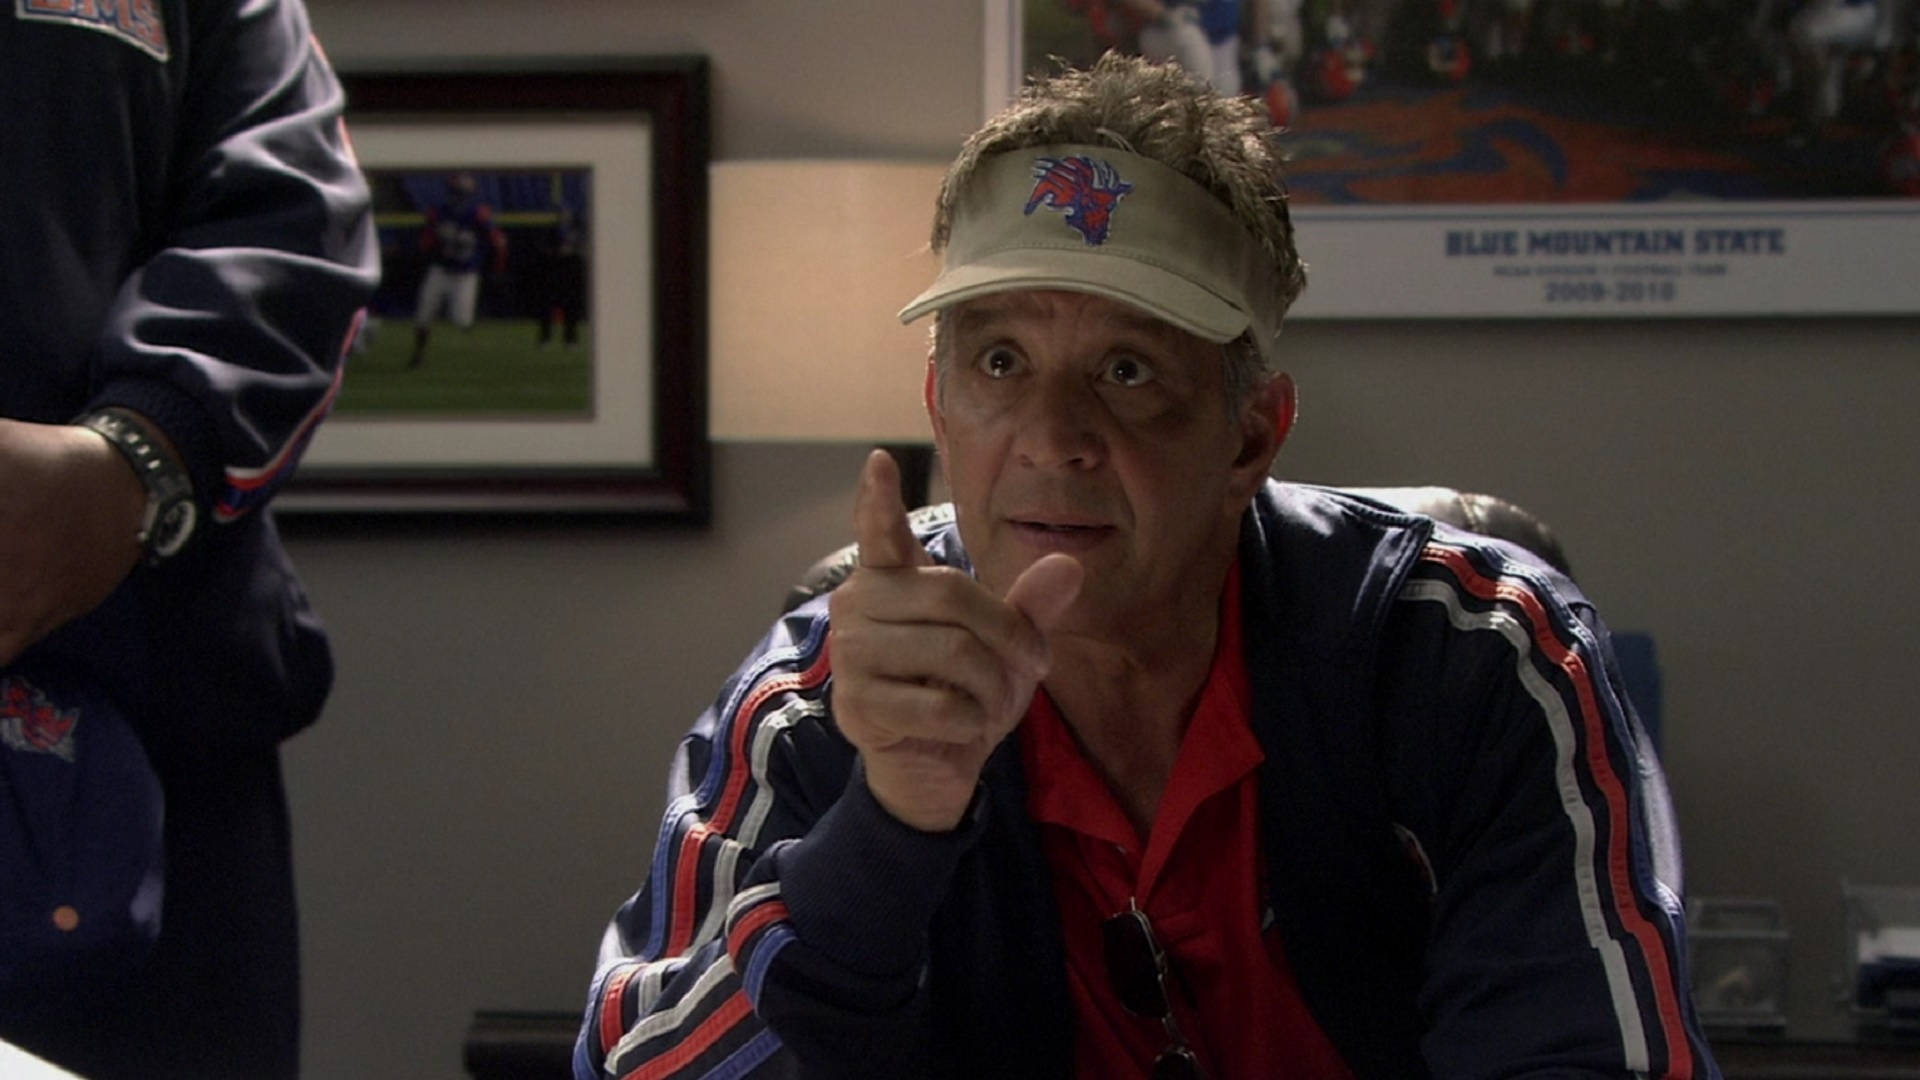 Blue Mountain State Old Coach Wallpaper